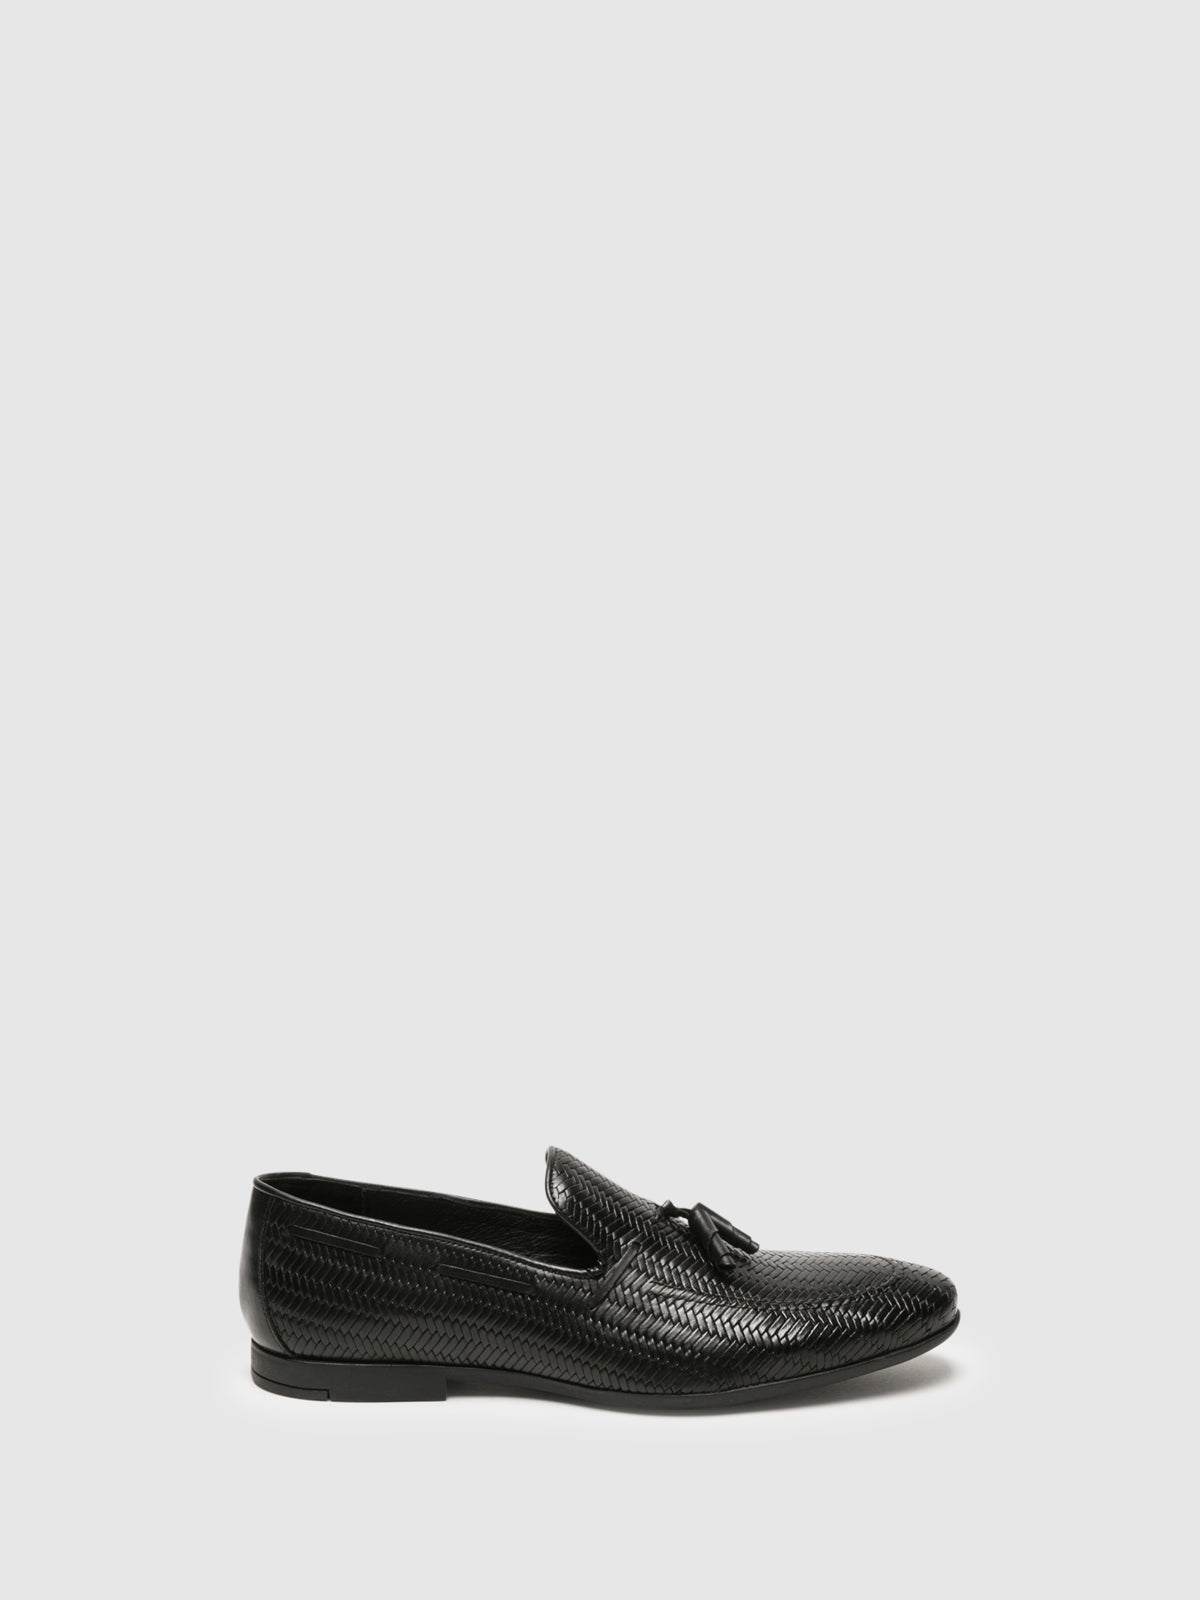 Foreva Black Loafers Shoes